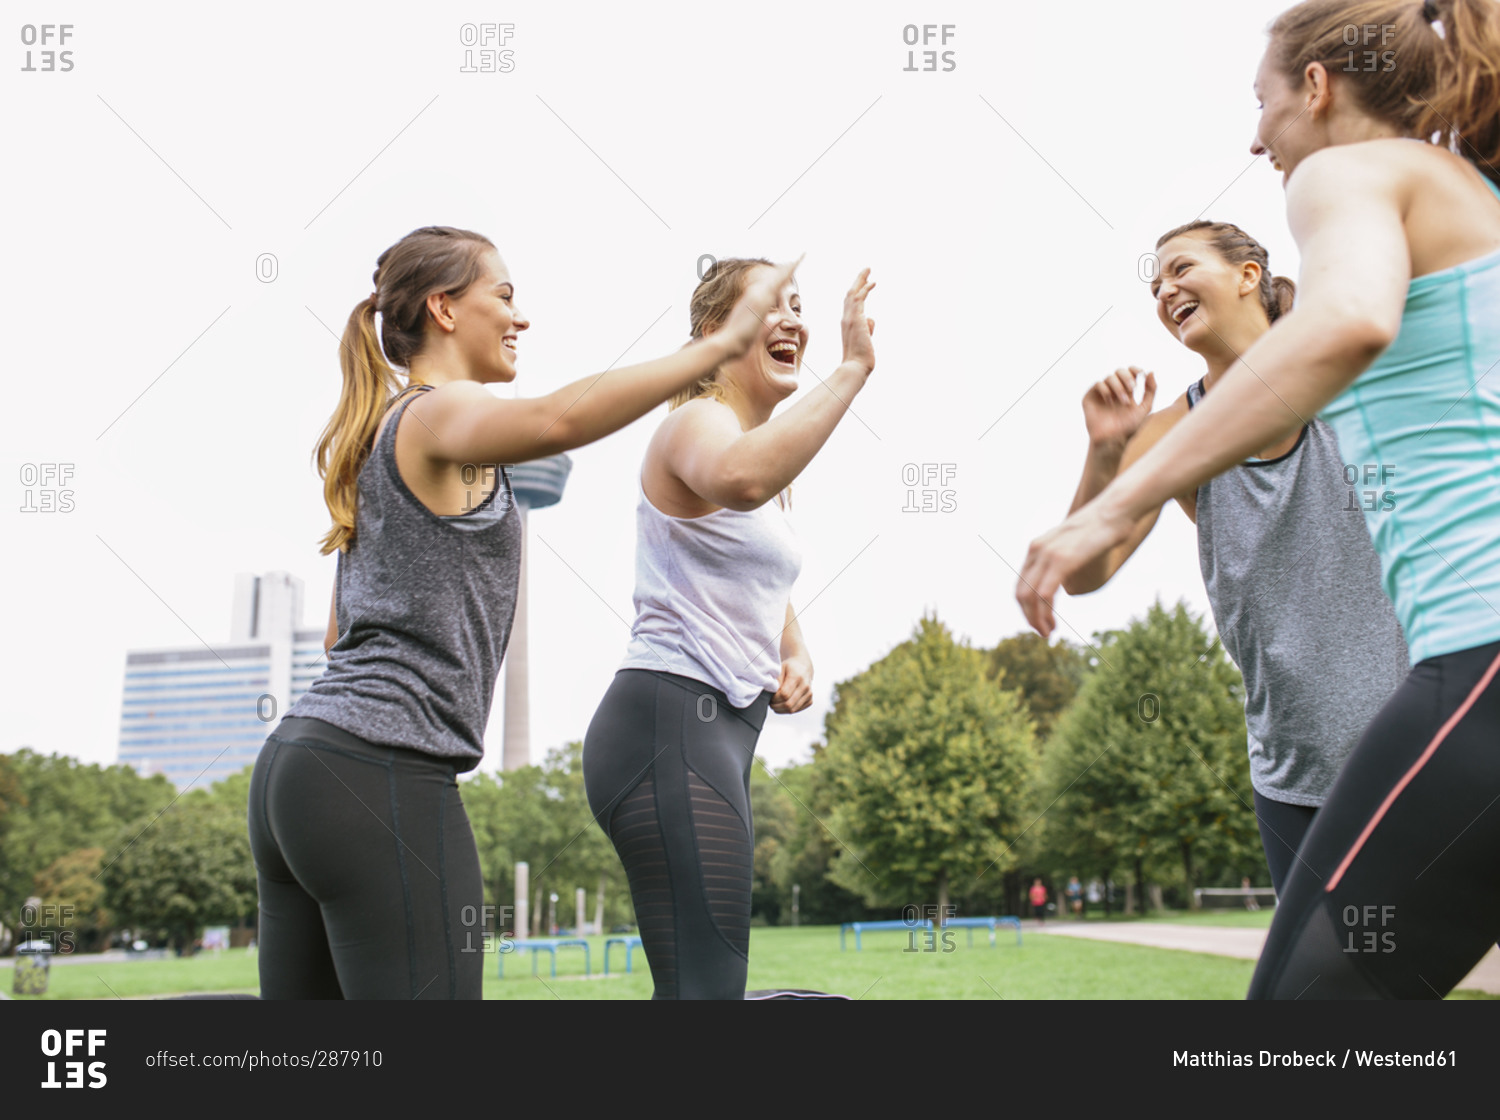 Four happy women high fiving after an outdoor workout